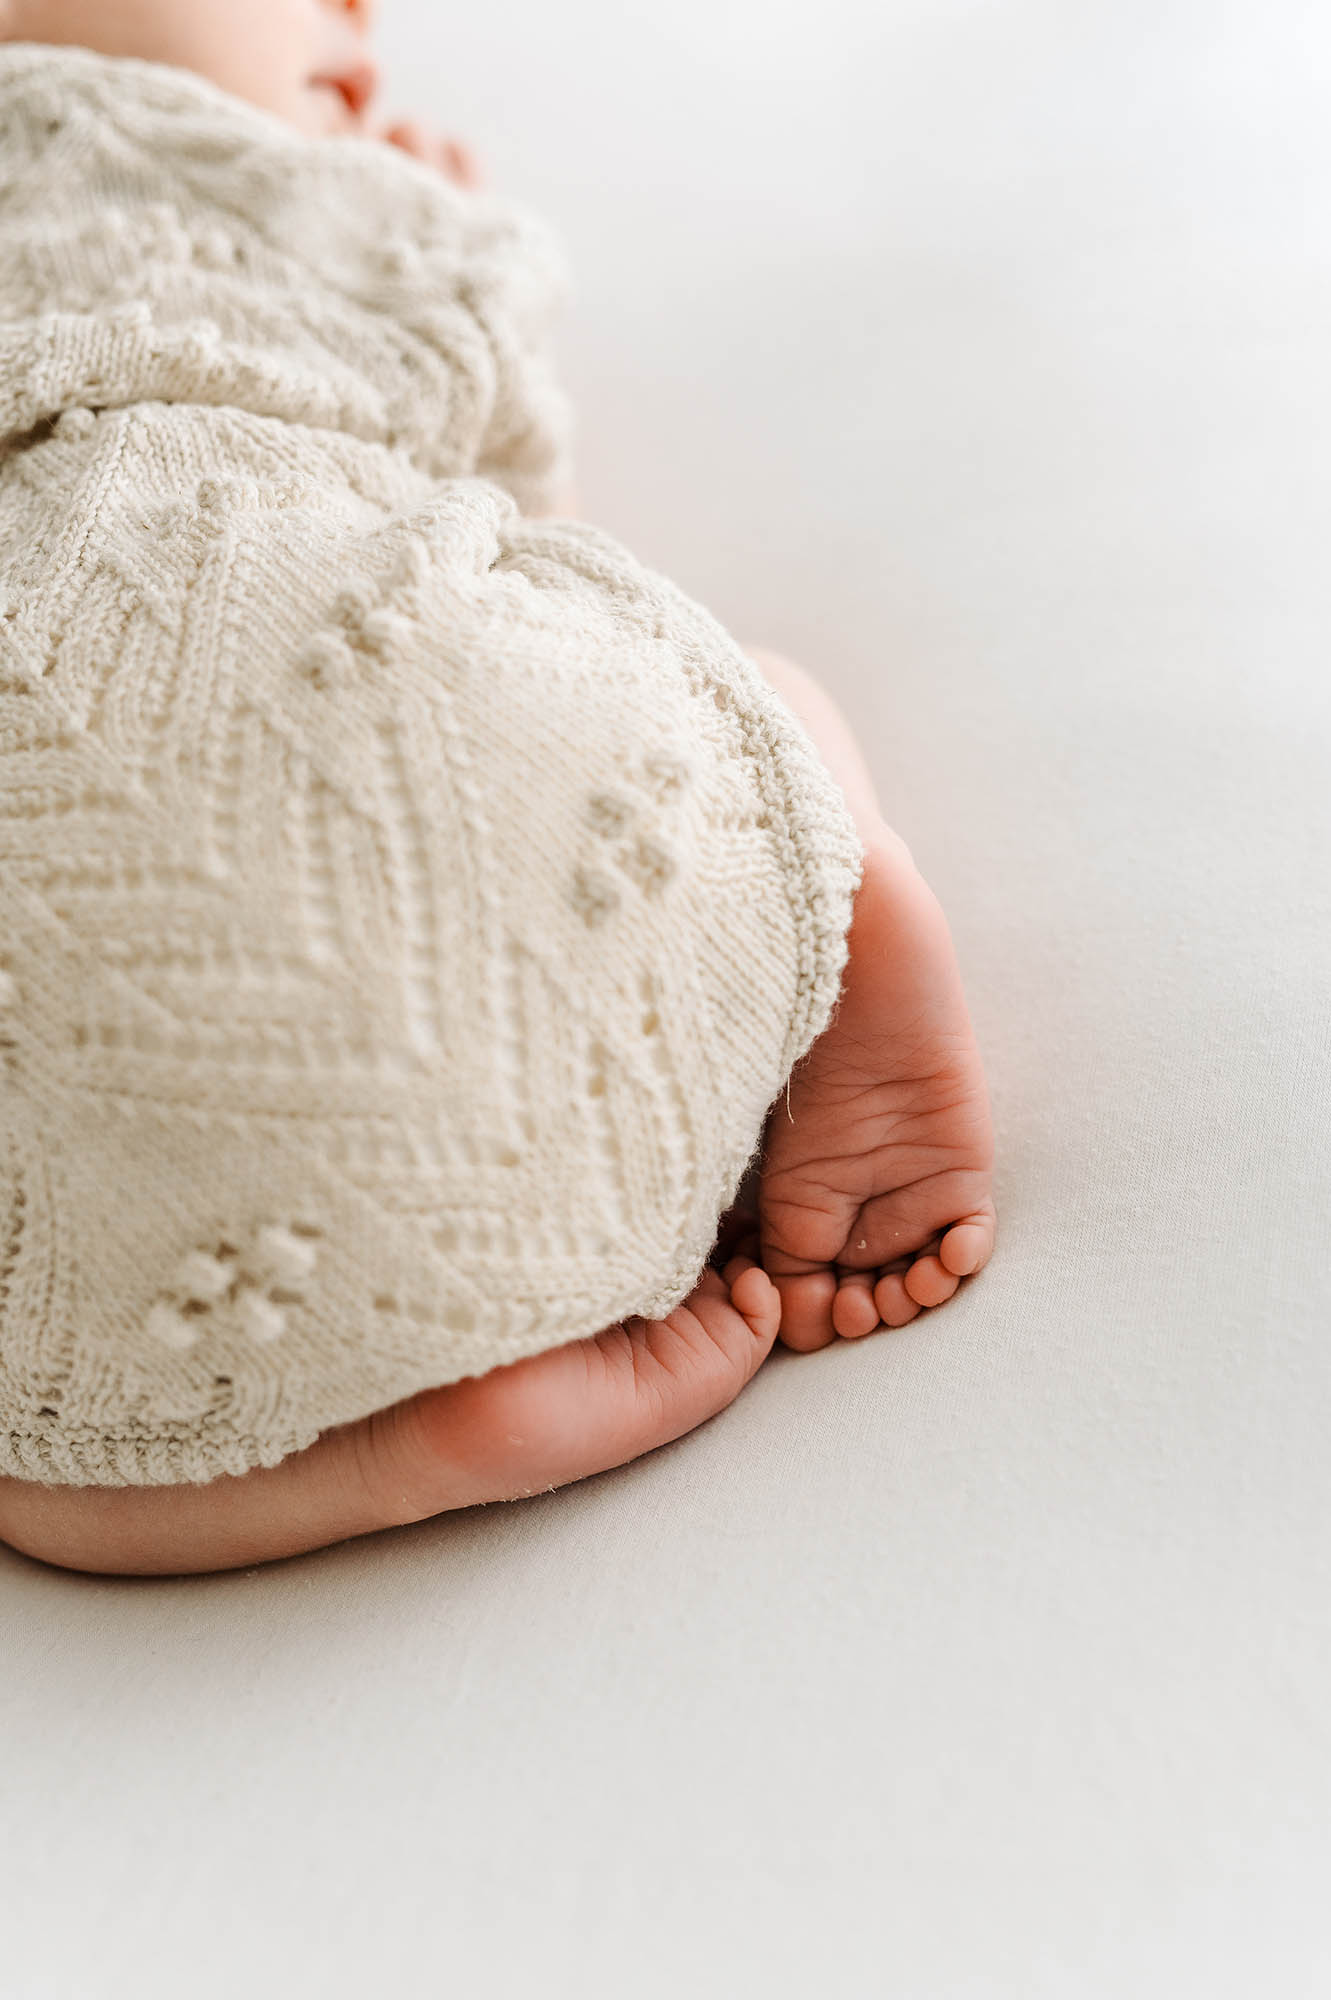 Baby feet close up in a knitted romper